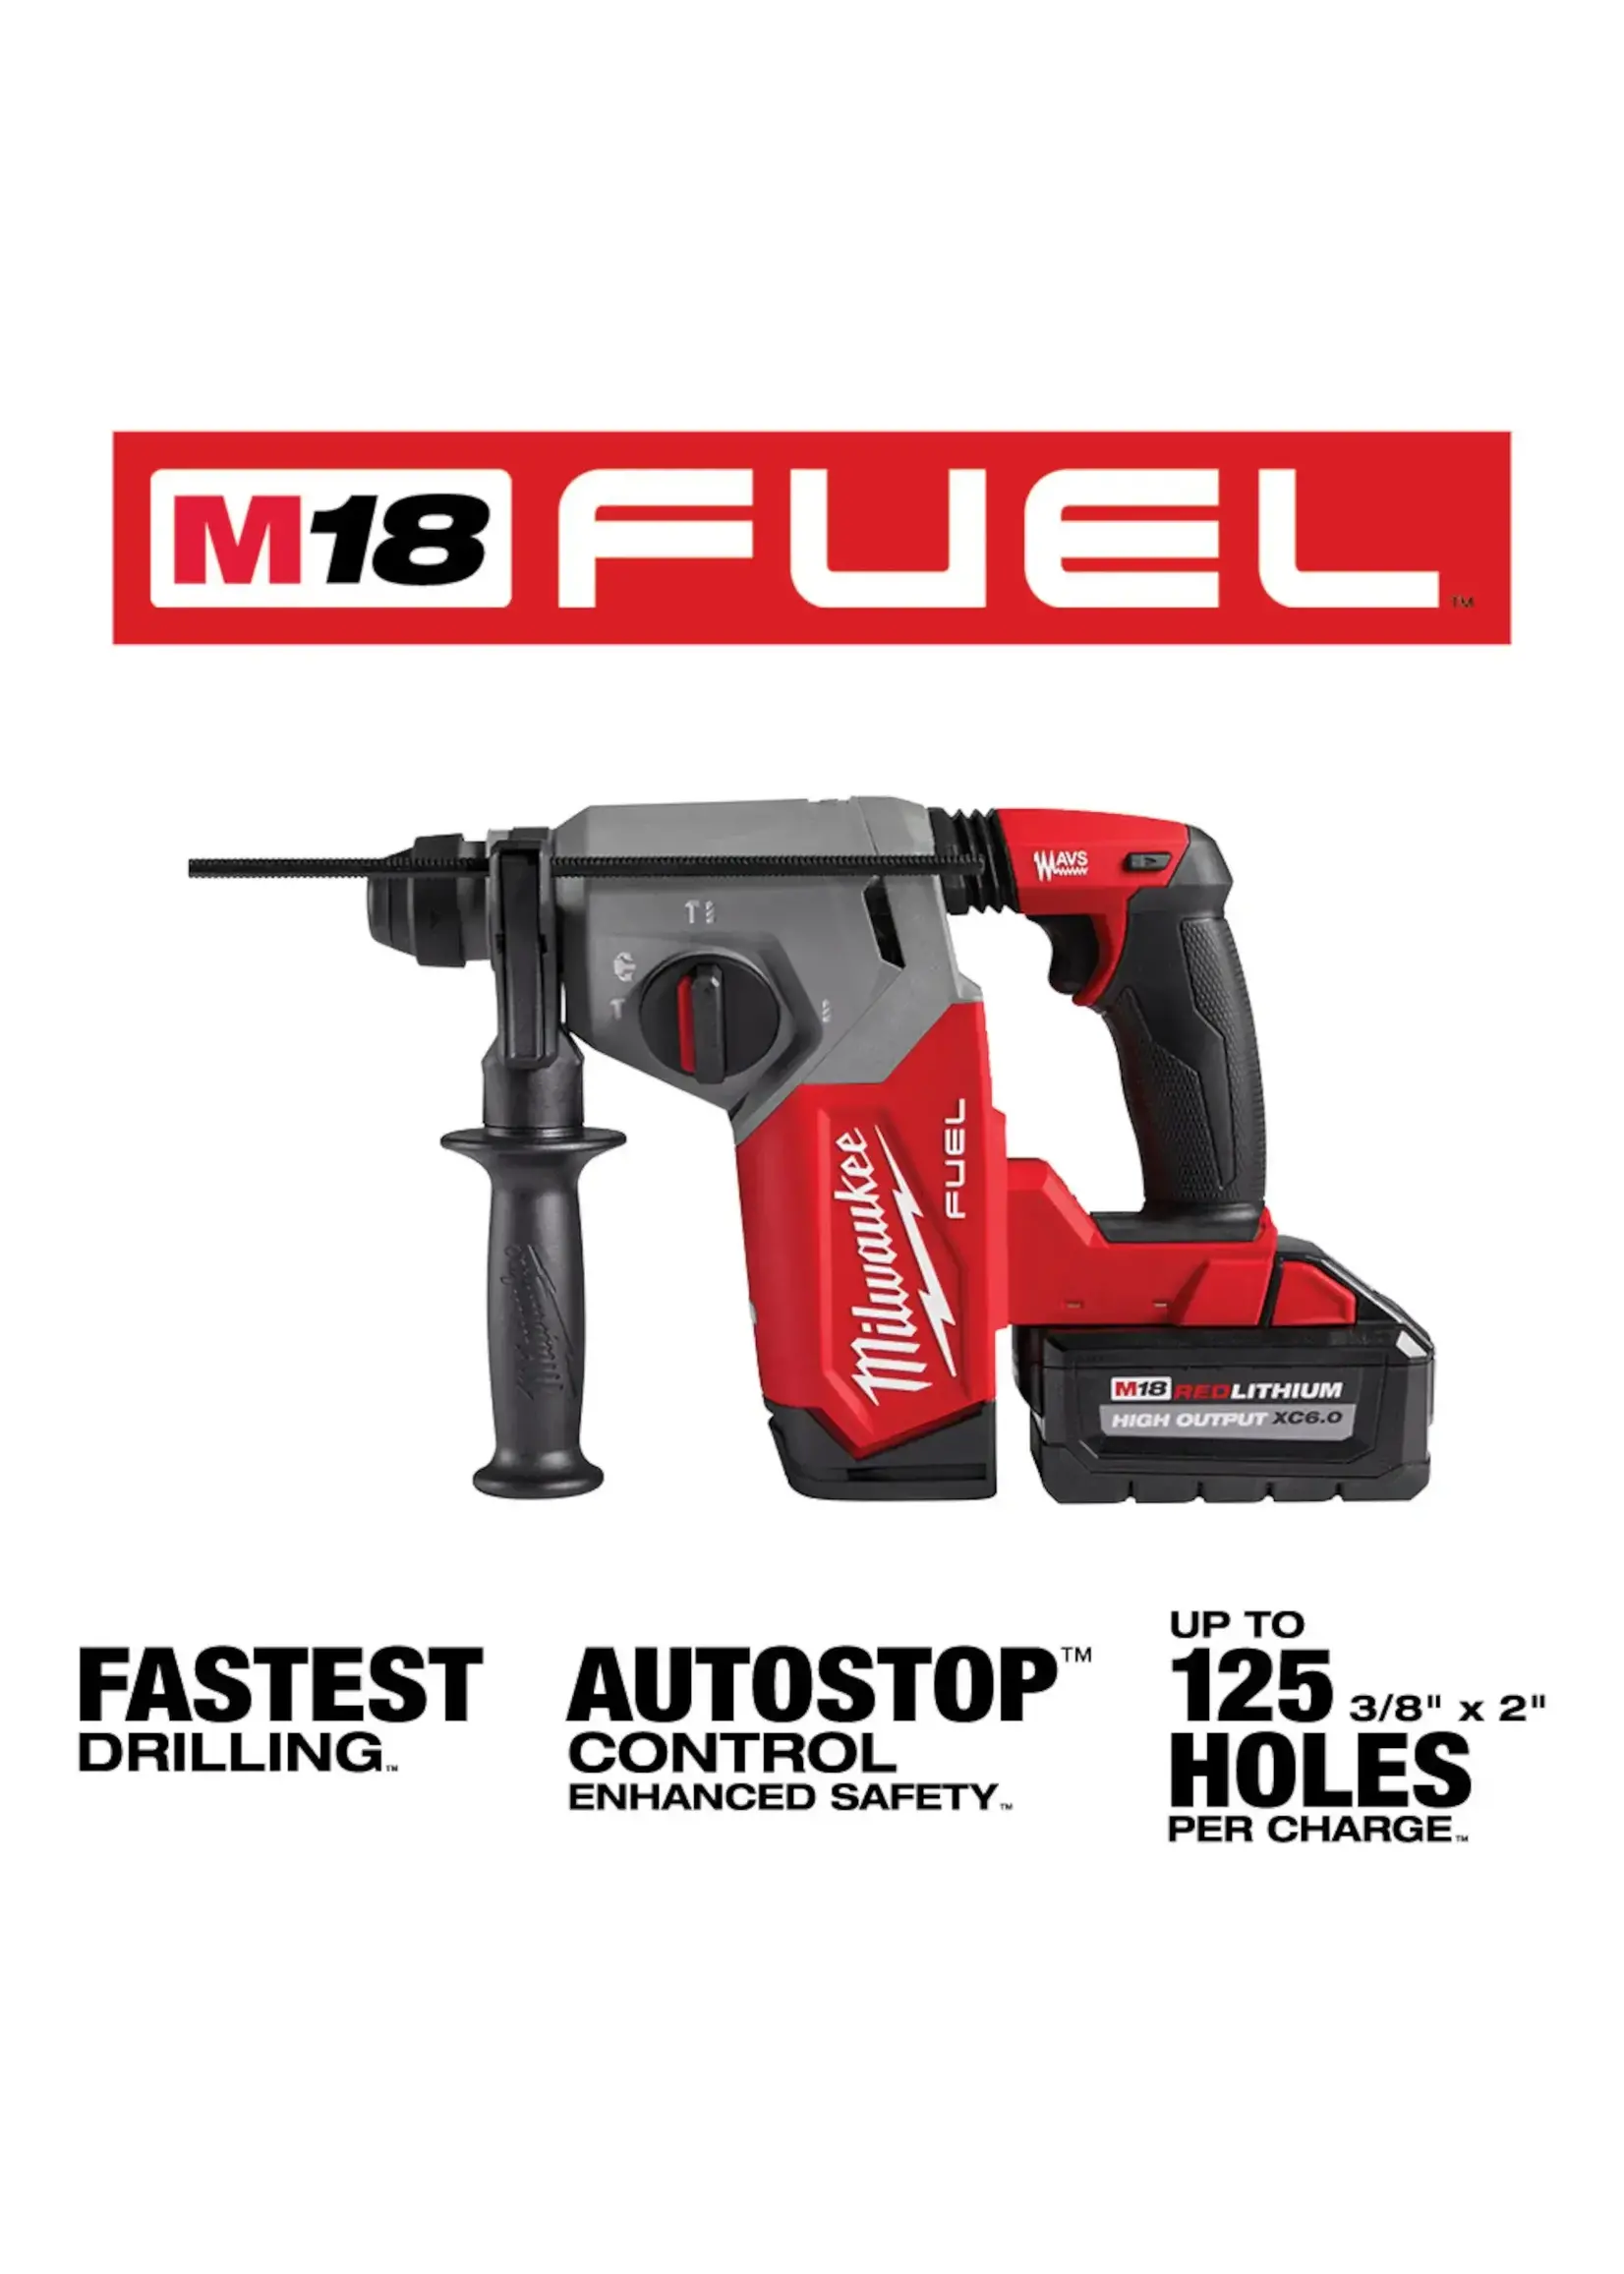 MILWAUKEE MILWAUKEE-M18 FUEL 18-Volt Lithium-Ion Brushless 1 in. Cordless SDS-Plus Rotary Hammer K/it with Two 6.0 Ah Batteries, Hard Case 2912-22